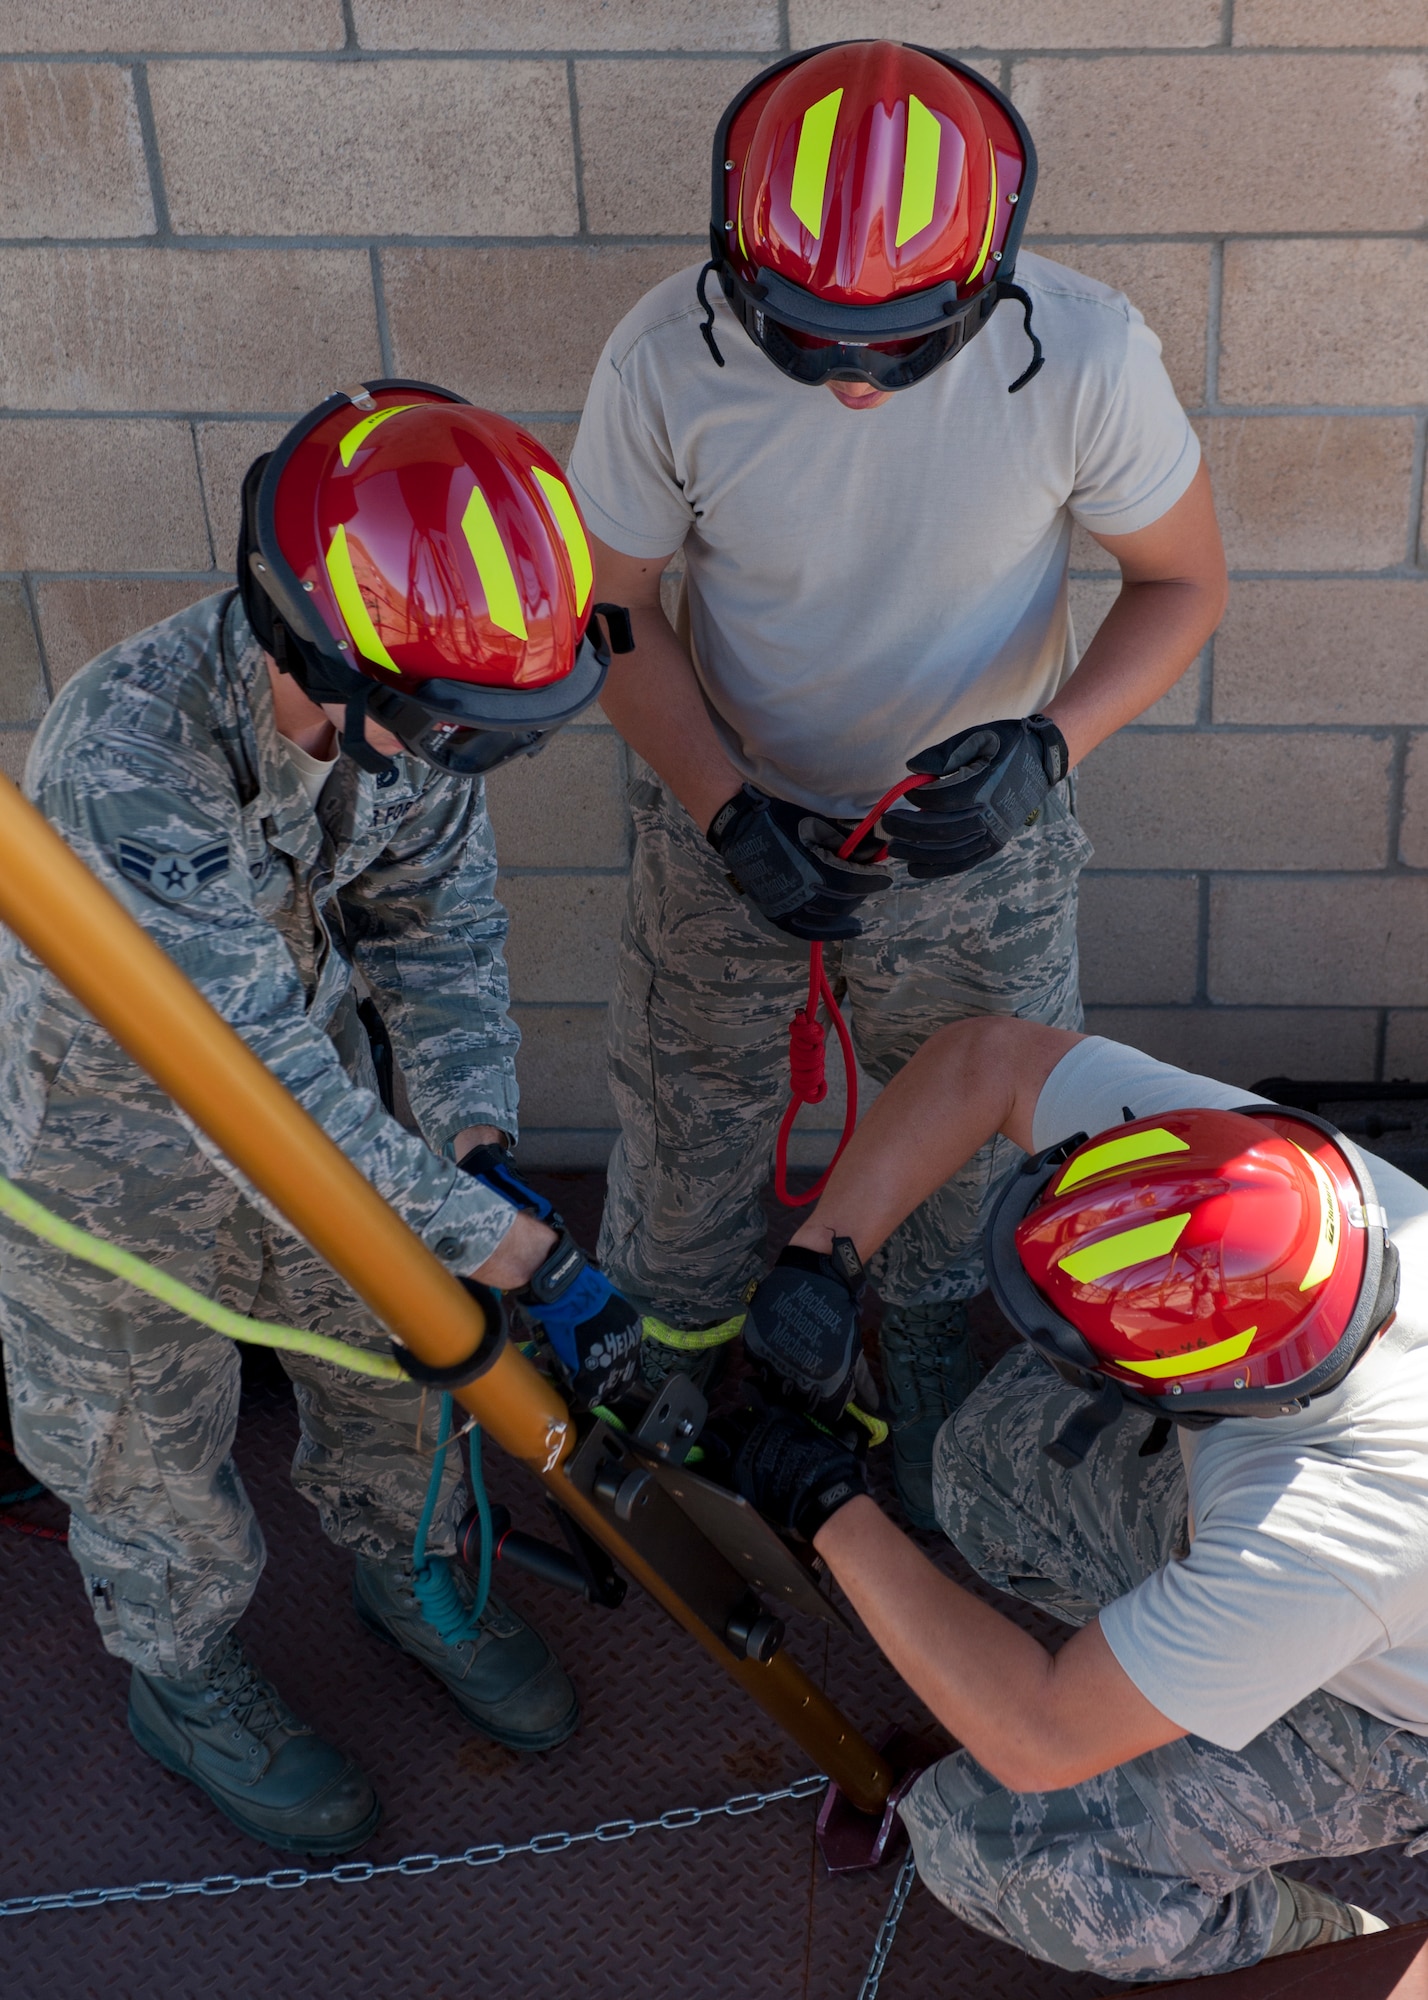 Airmen 1st Class Ryan Oke and John Murray and Senior Airman Gerrit Beernick, 49th Civil Engineering Squadron Fire Protection Flight firefighters, secure safety ropes to the rescue tripod during a confined space training exercise at Holloman Air Force Base, N.M., Sept. 25. Firefighters from the 49th CES performed a series of training exercises during the 49th Wing’s Unit Effectiveness Inspection Sept. 25 – 29. Holloman AFB is the first base in the Air Combat Command to undergo a UEI under the Air Force’s new inspection system, announced in August. (U.S. Air Force photo by Airman 1st Class Aaron Montoya/Released)